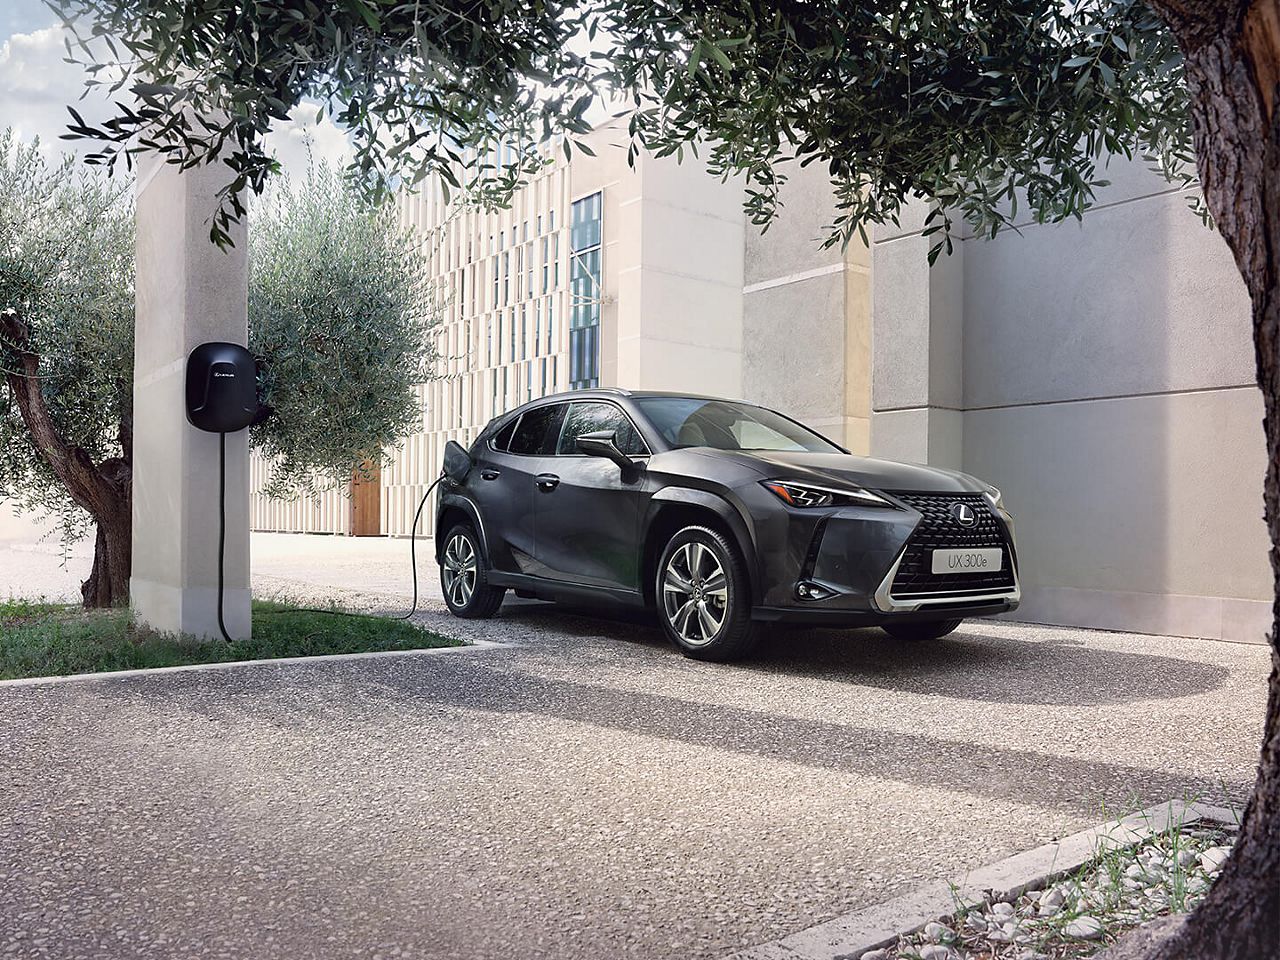 Lexus UX 300e | Discover The All-Electric SUV | Lexus UK